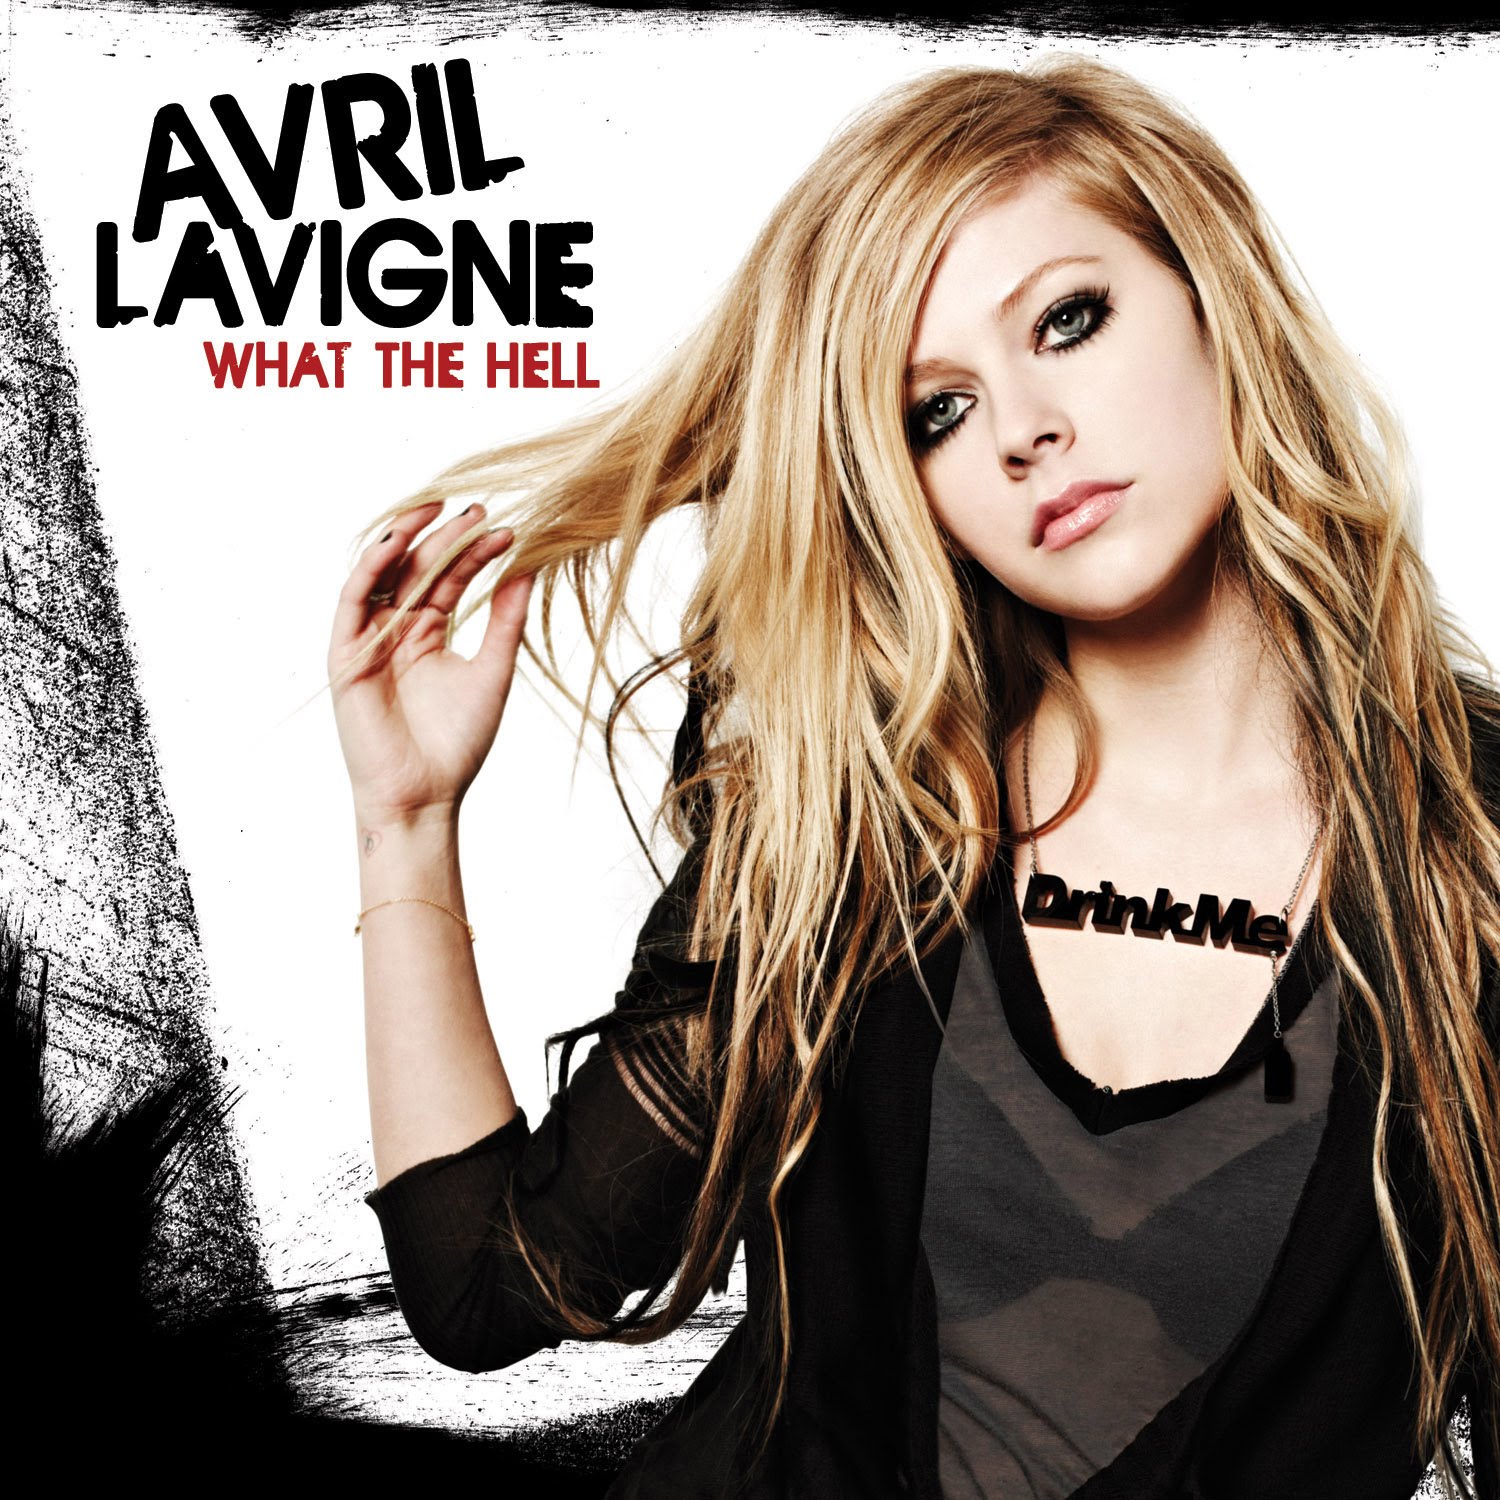 Avril Lavigne – What the hell?